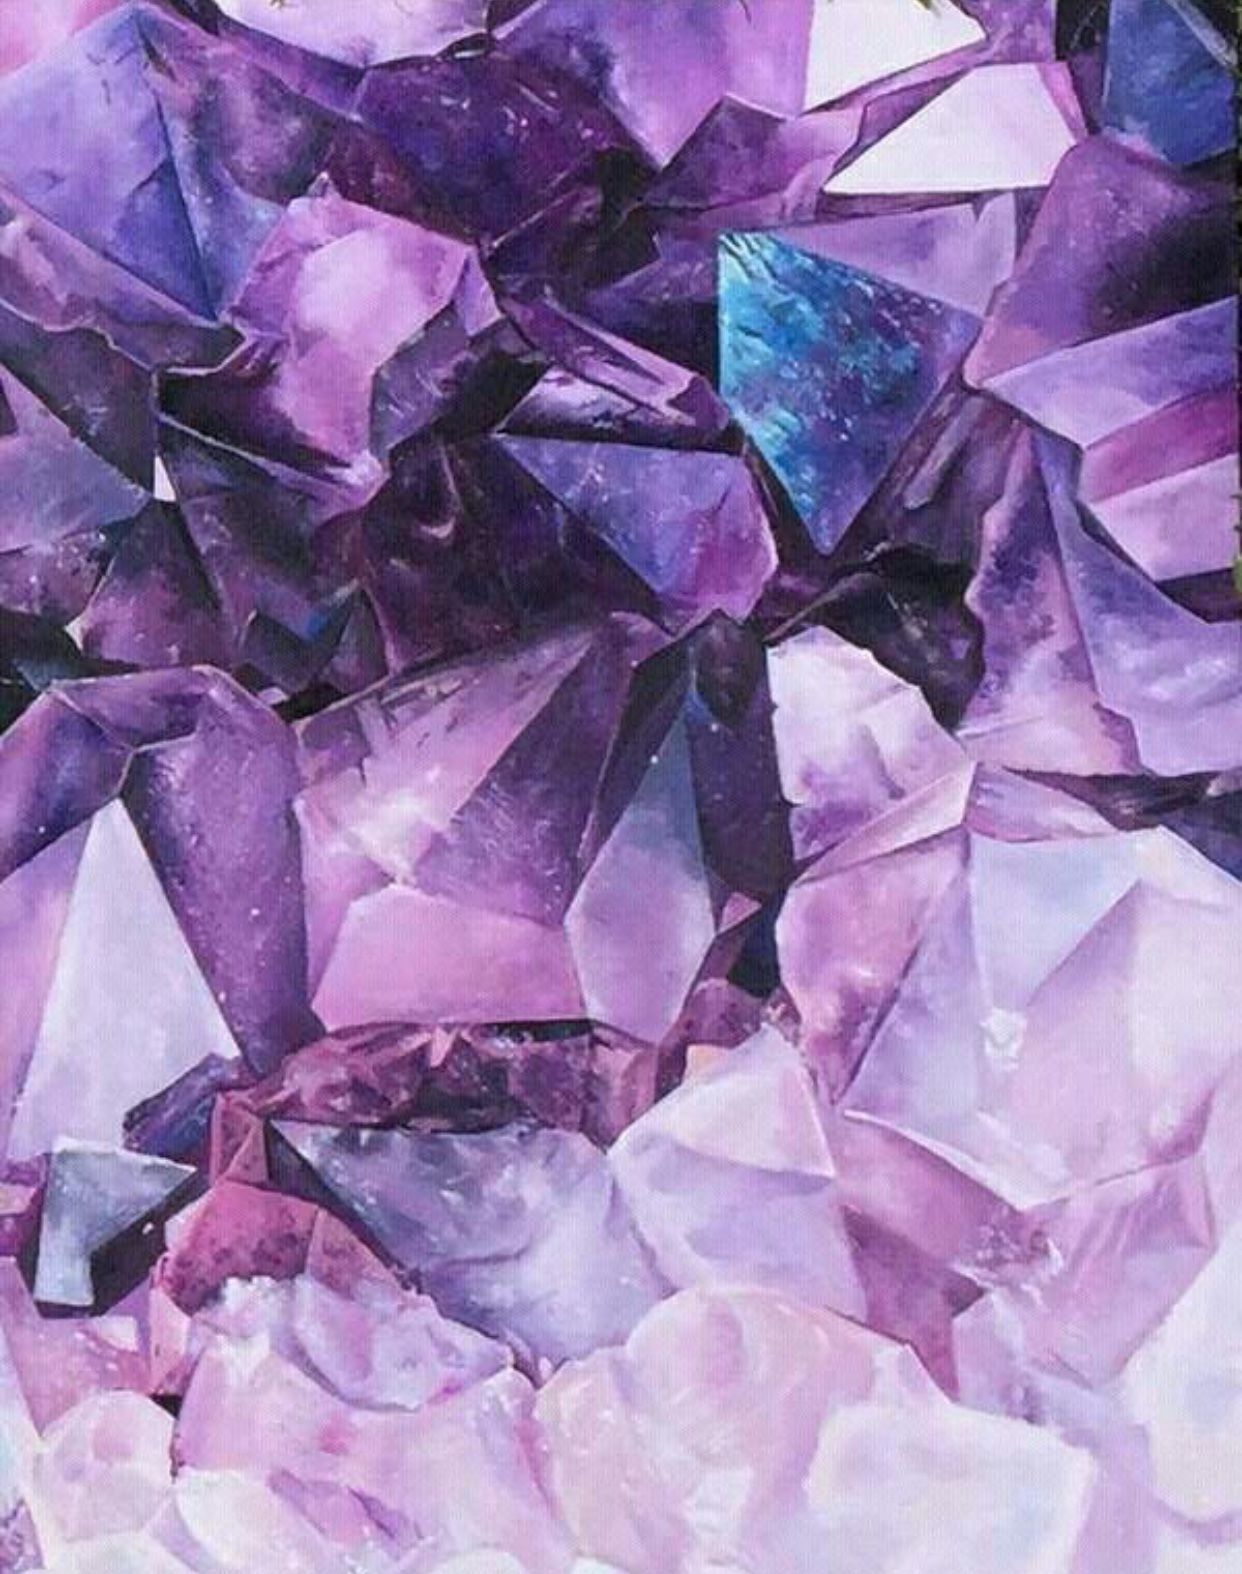 A close up of purple and blue crystals - Silver